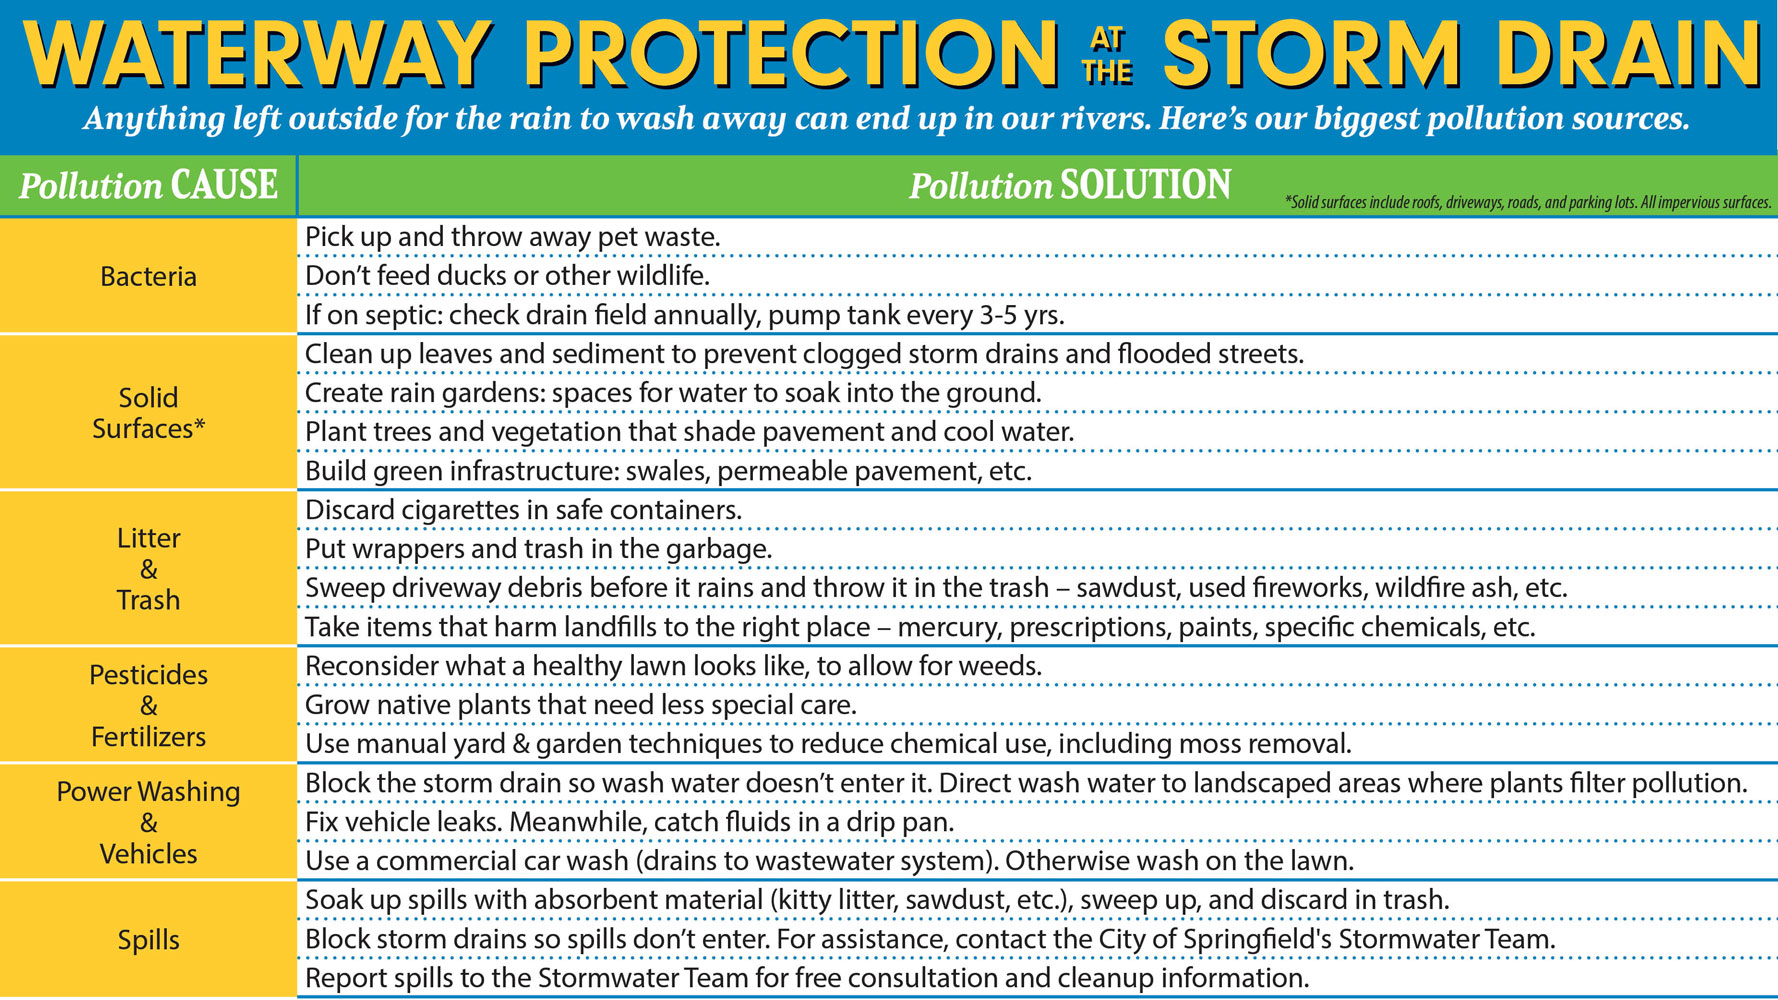 Table showing common pollution sources and solutions to each kind of pollution.